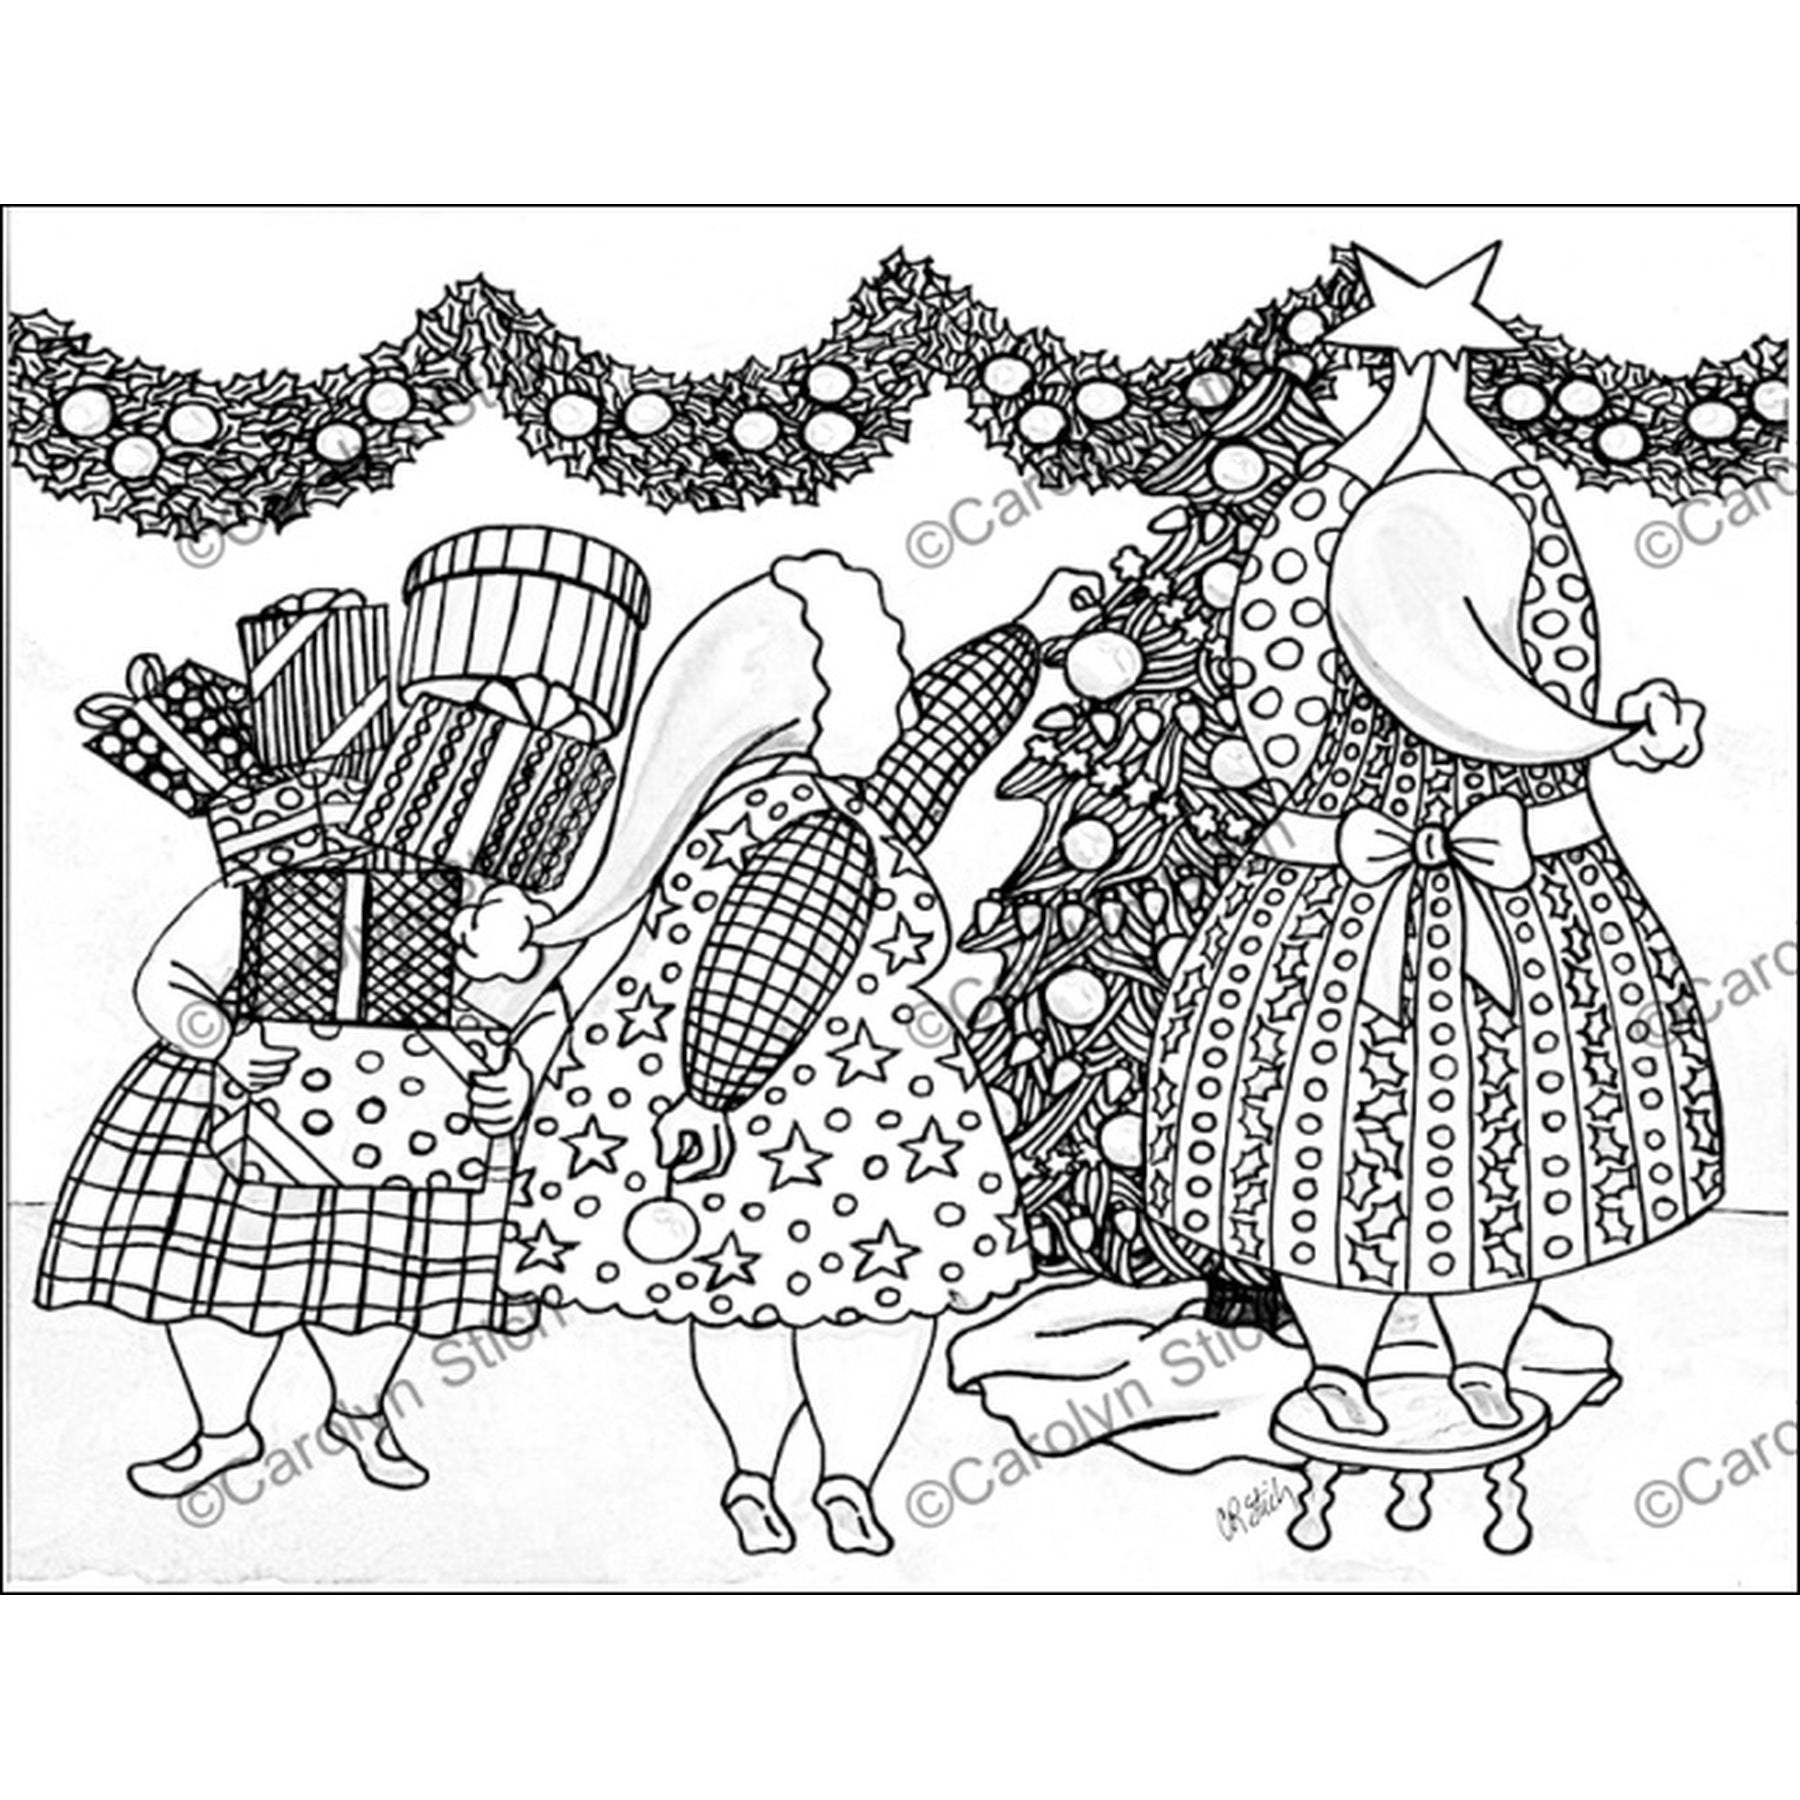 The Girls Wishing You Happy Holidays, rug hooking pattern